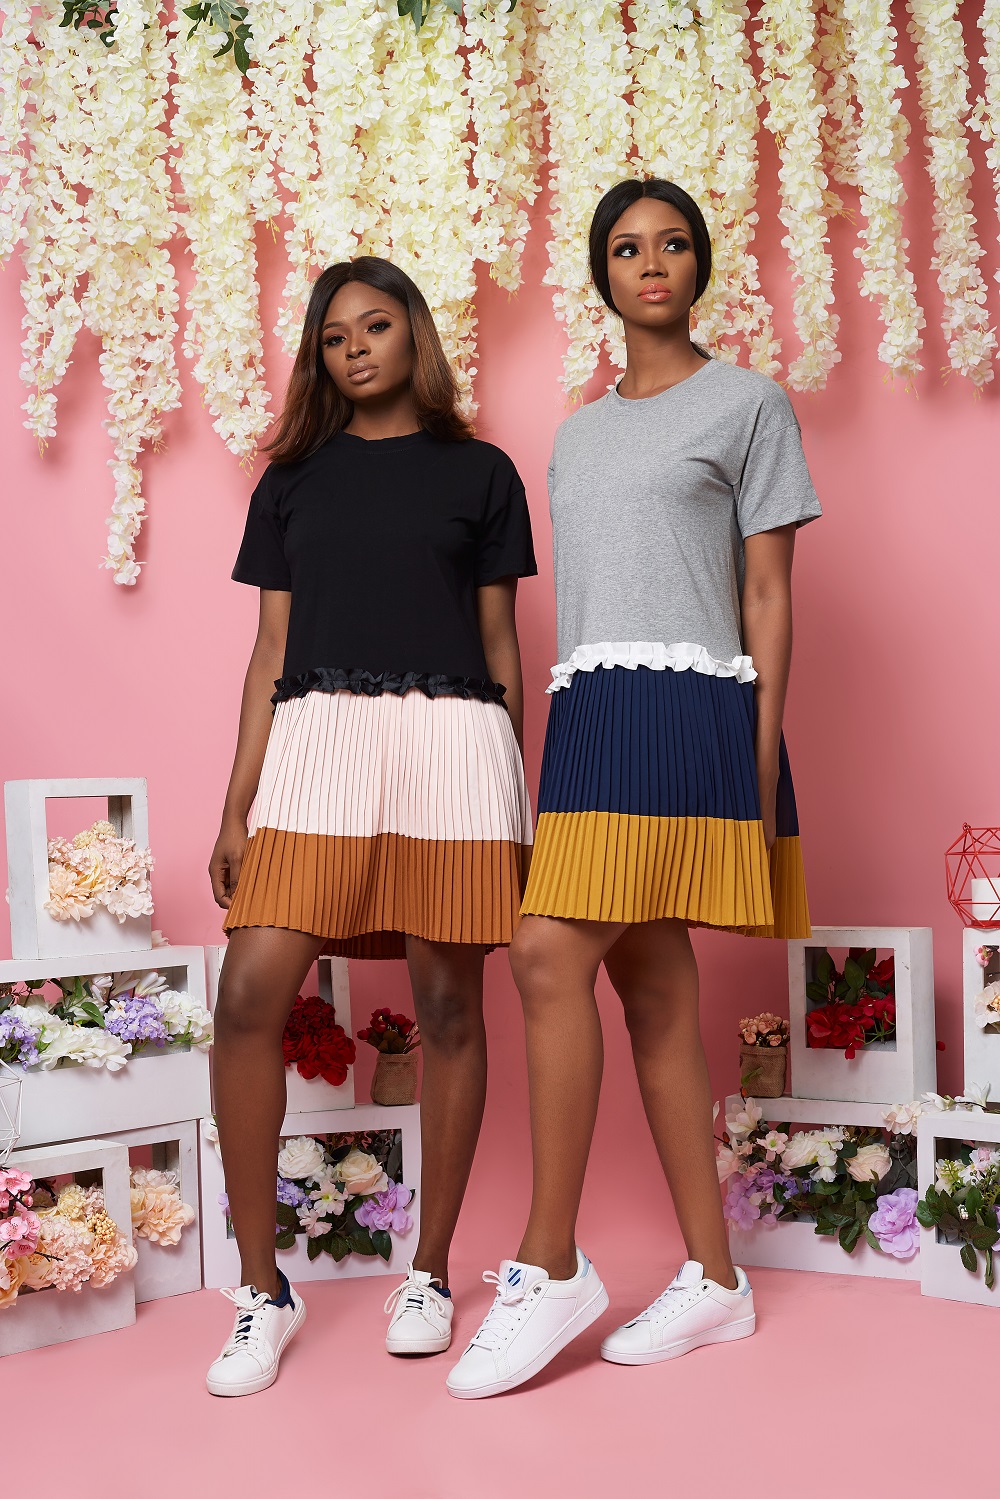 RHB Style’s New Collection Is As Pretty As It Is Playful